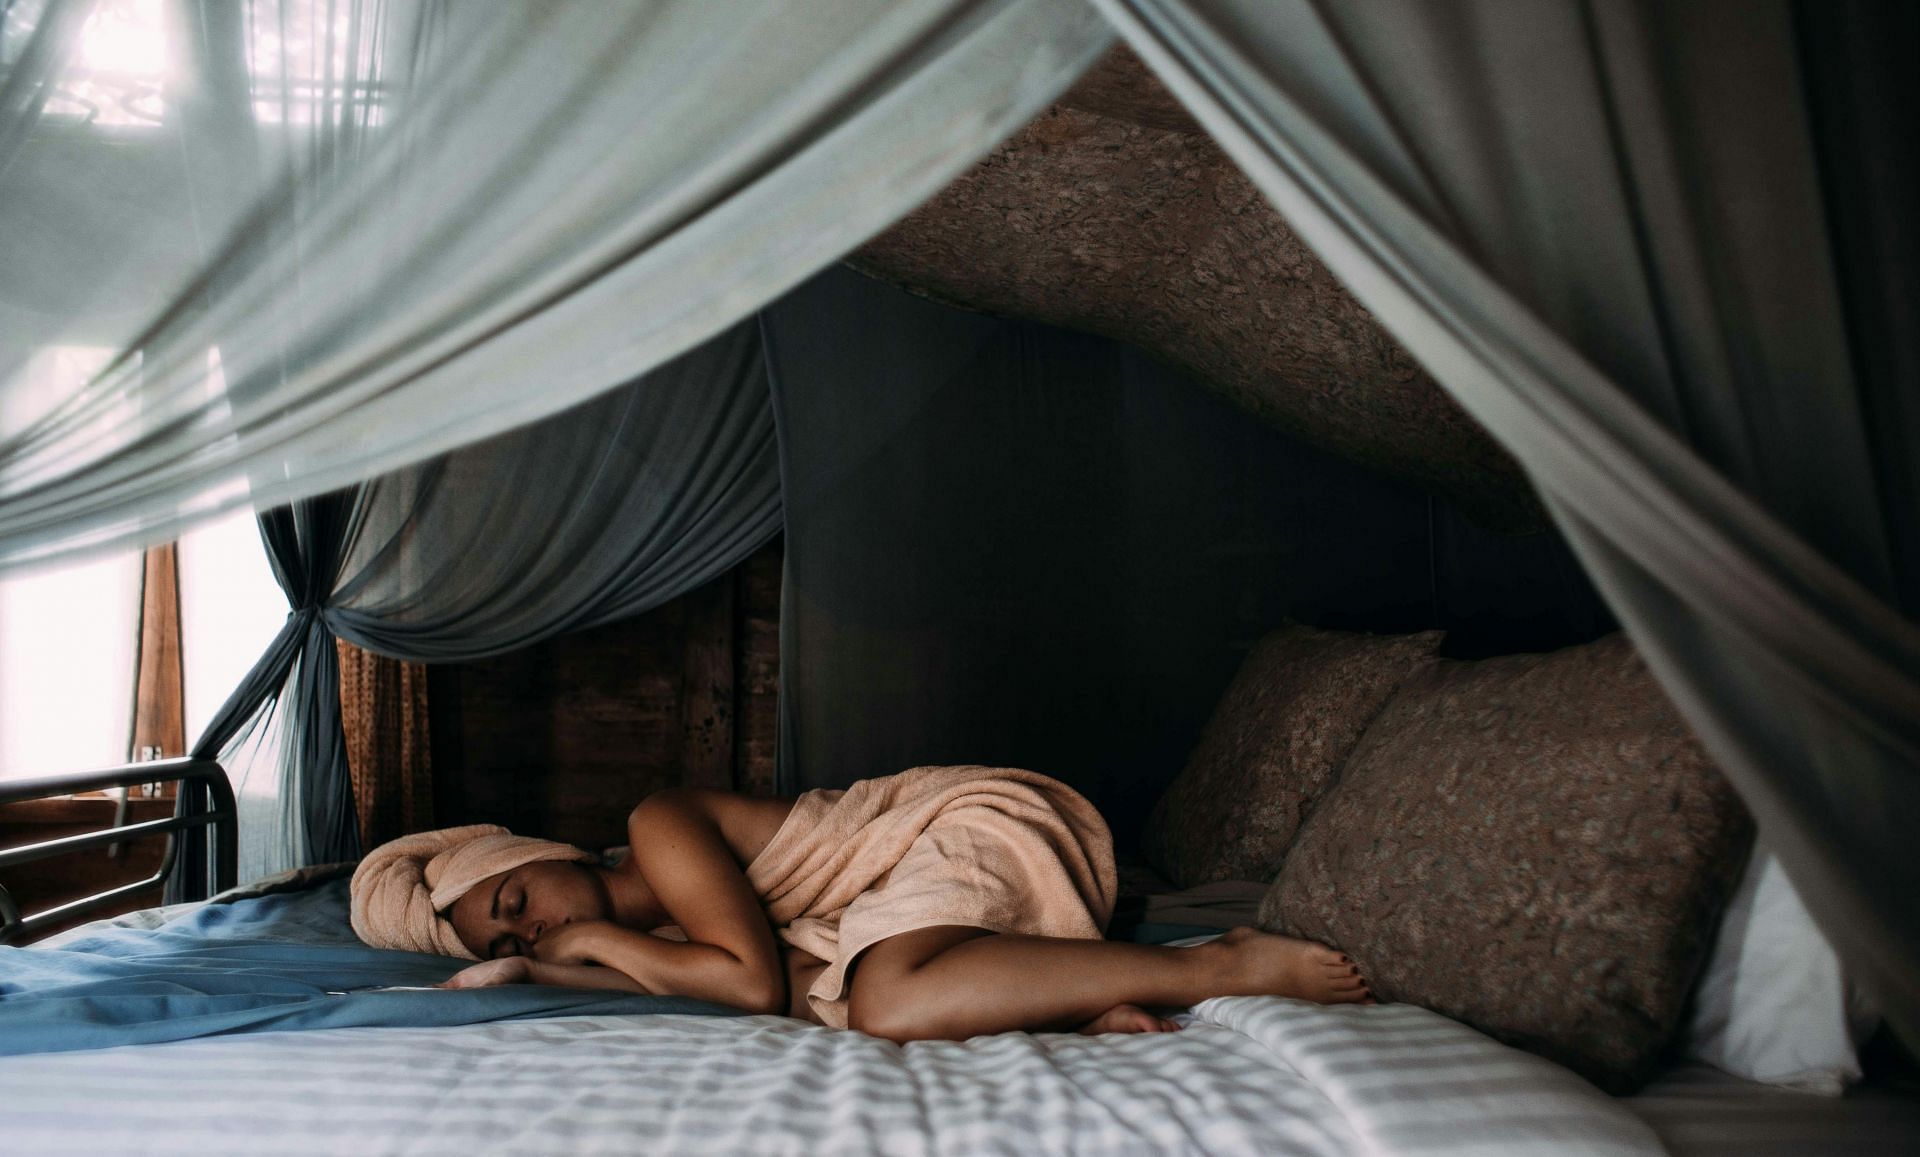 Importance of sleep for teenagers (image sourced via Pexels / Photo by Rachel Claire)